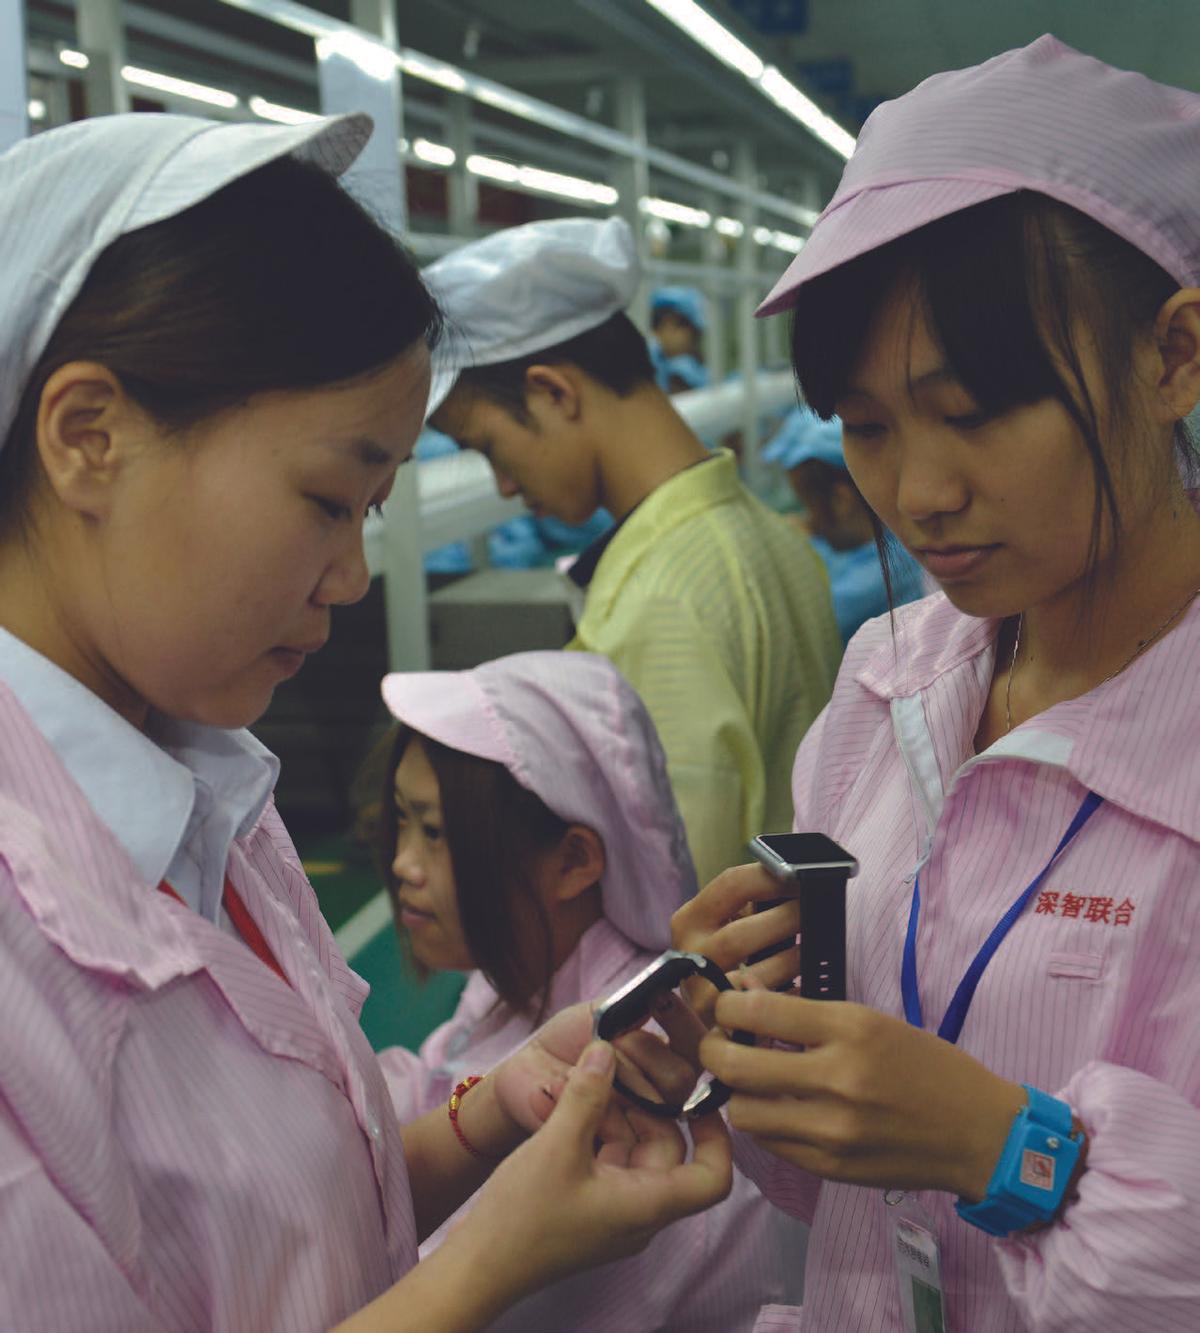 Chinese workers pose with a cheaper, local alternative to the Apple Watch in Shenzhen, in southern China’s Guangdong Province, on April 22, 2015. (STR/AFP/GETTY IMAGES)